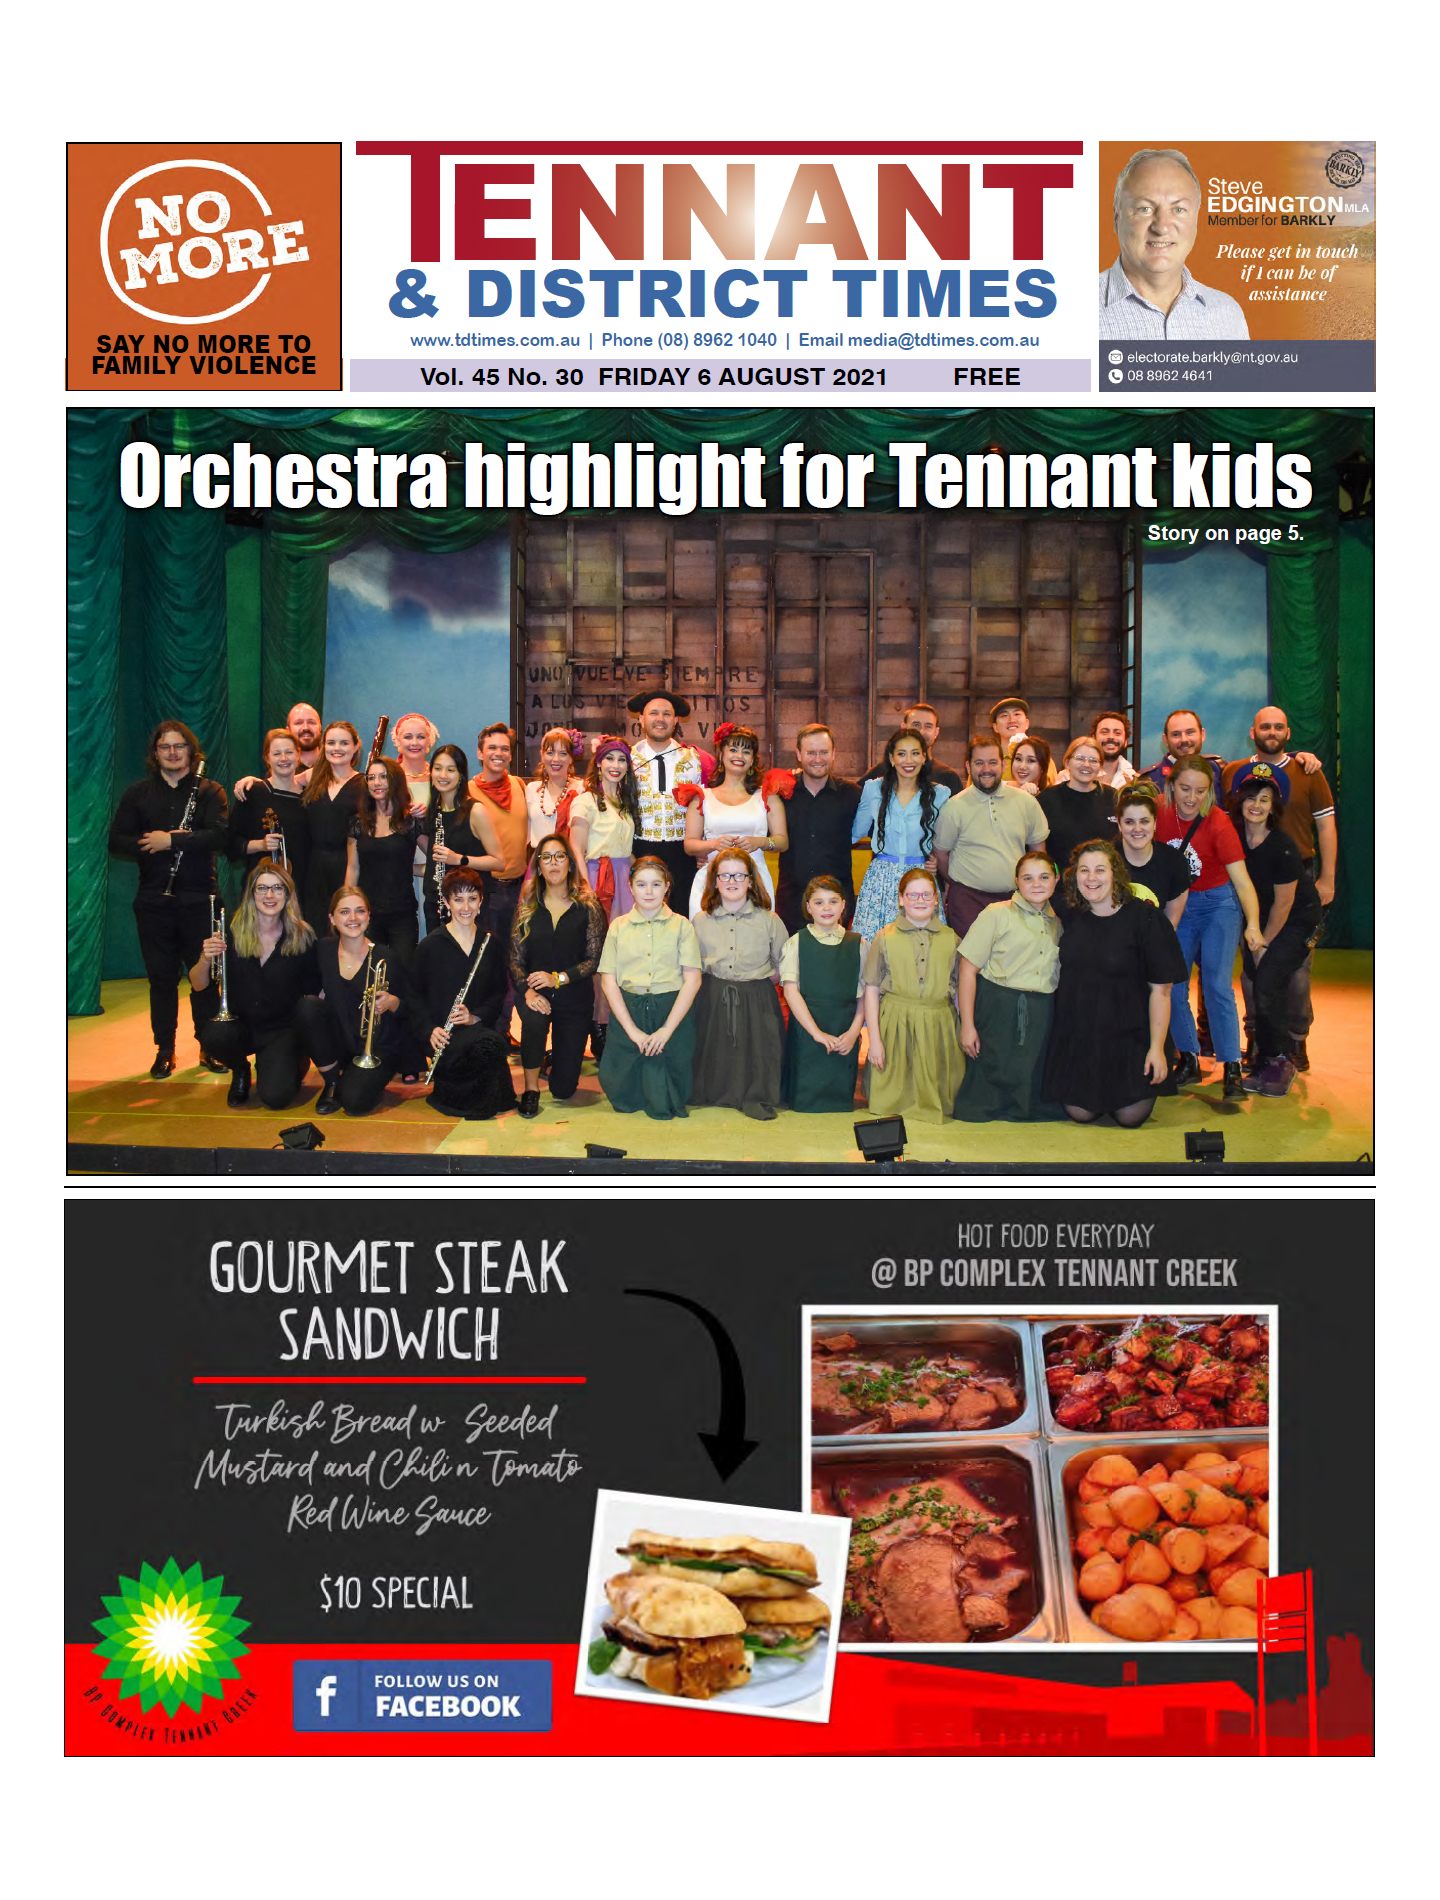 Tennant & District Times 6 August 2021